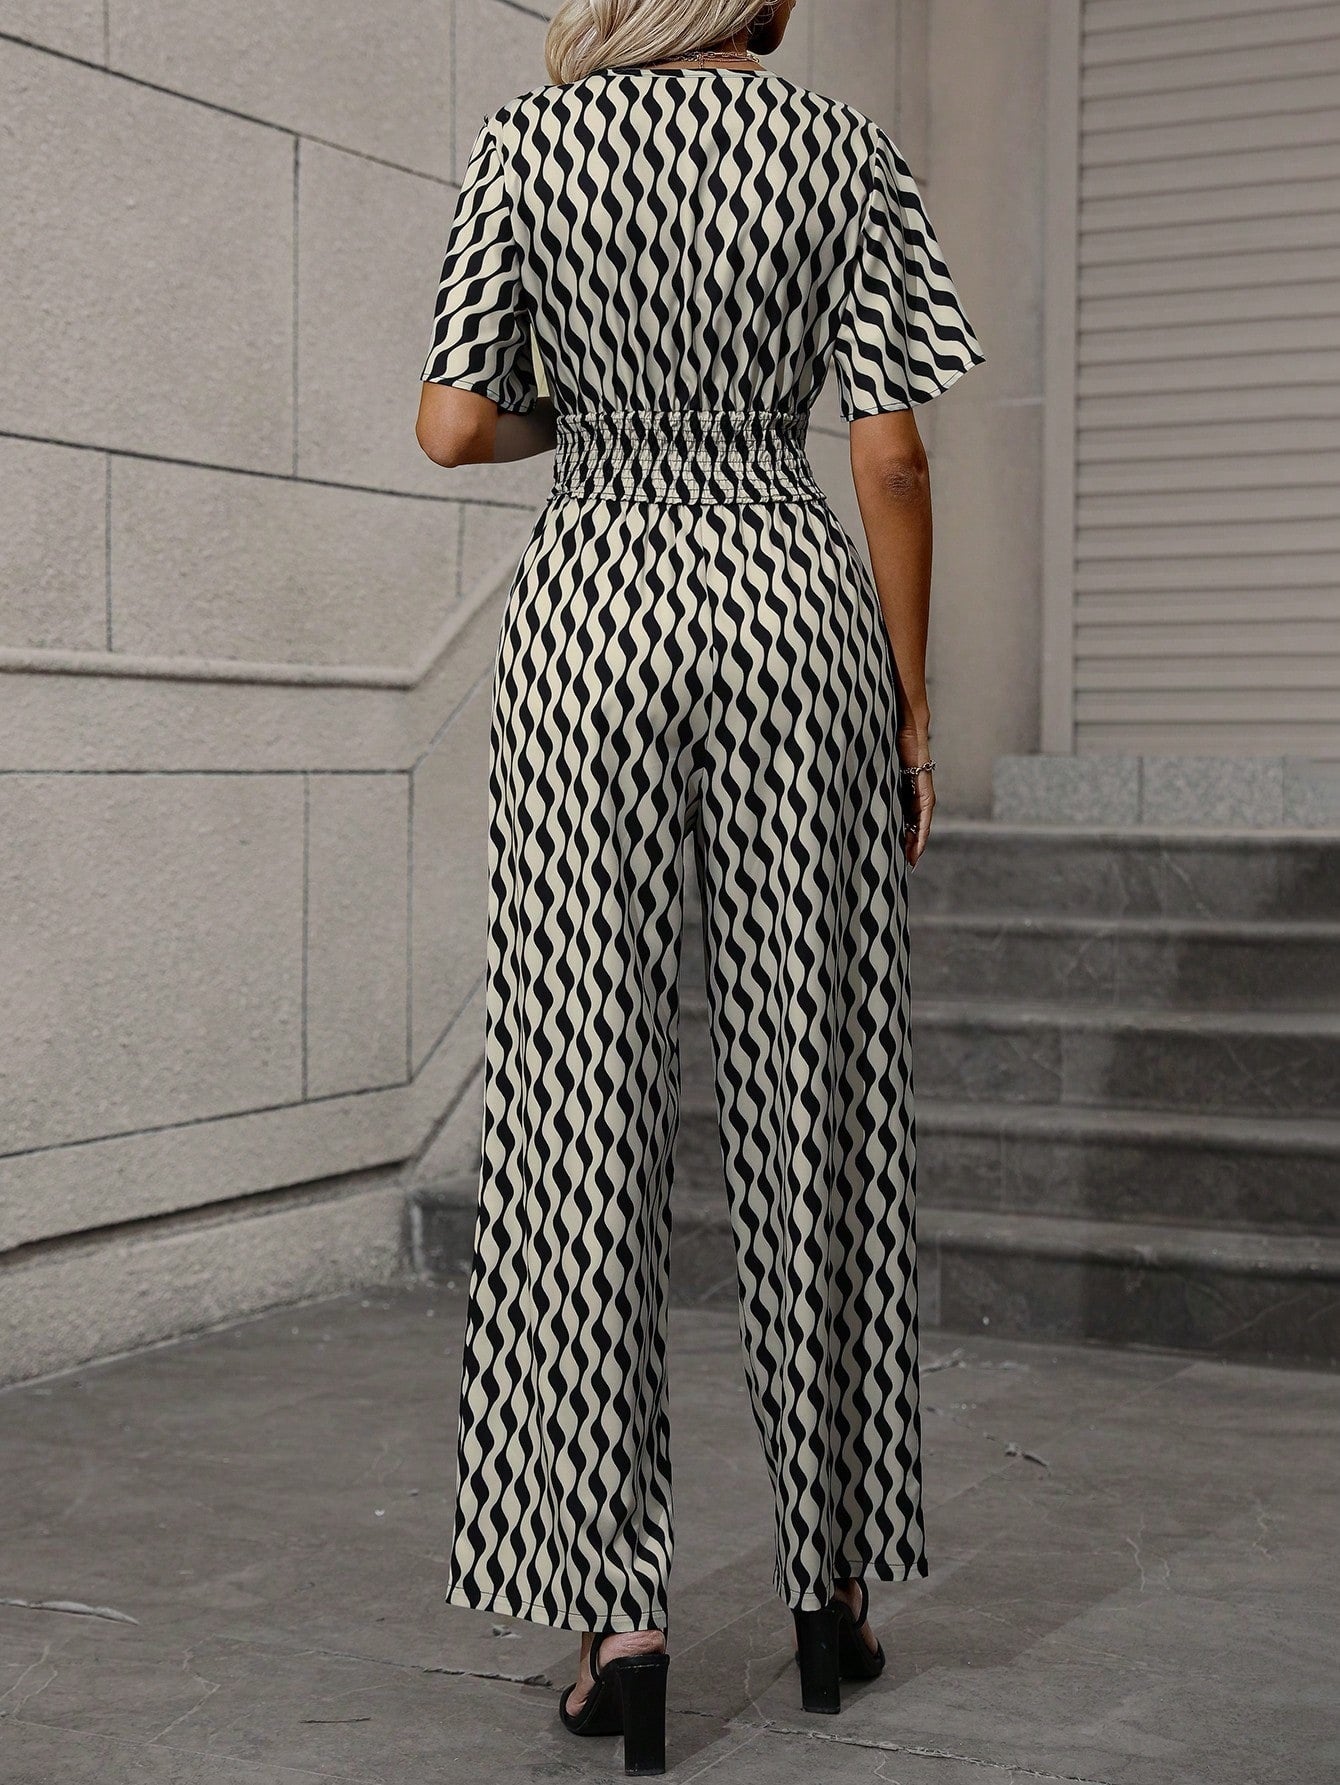 Women's Fashionable Printed Loose Trousers Suit